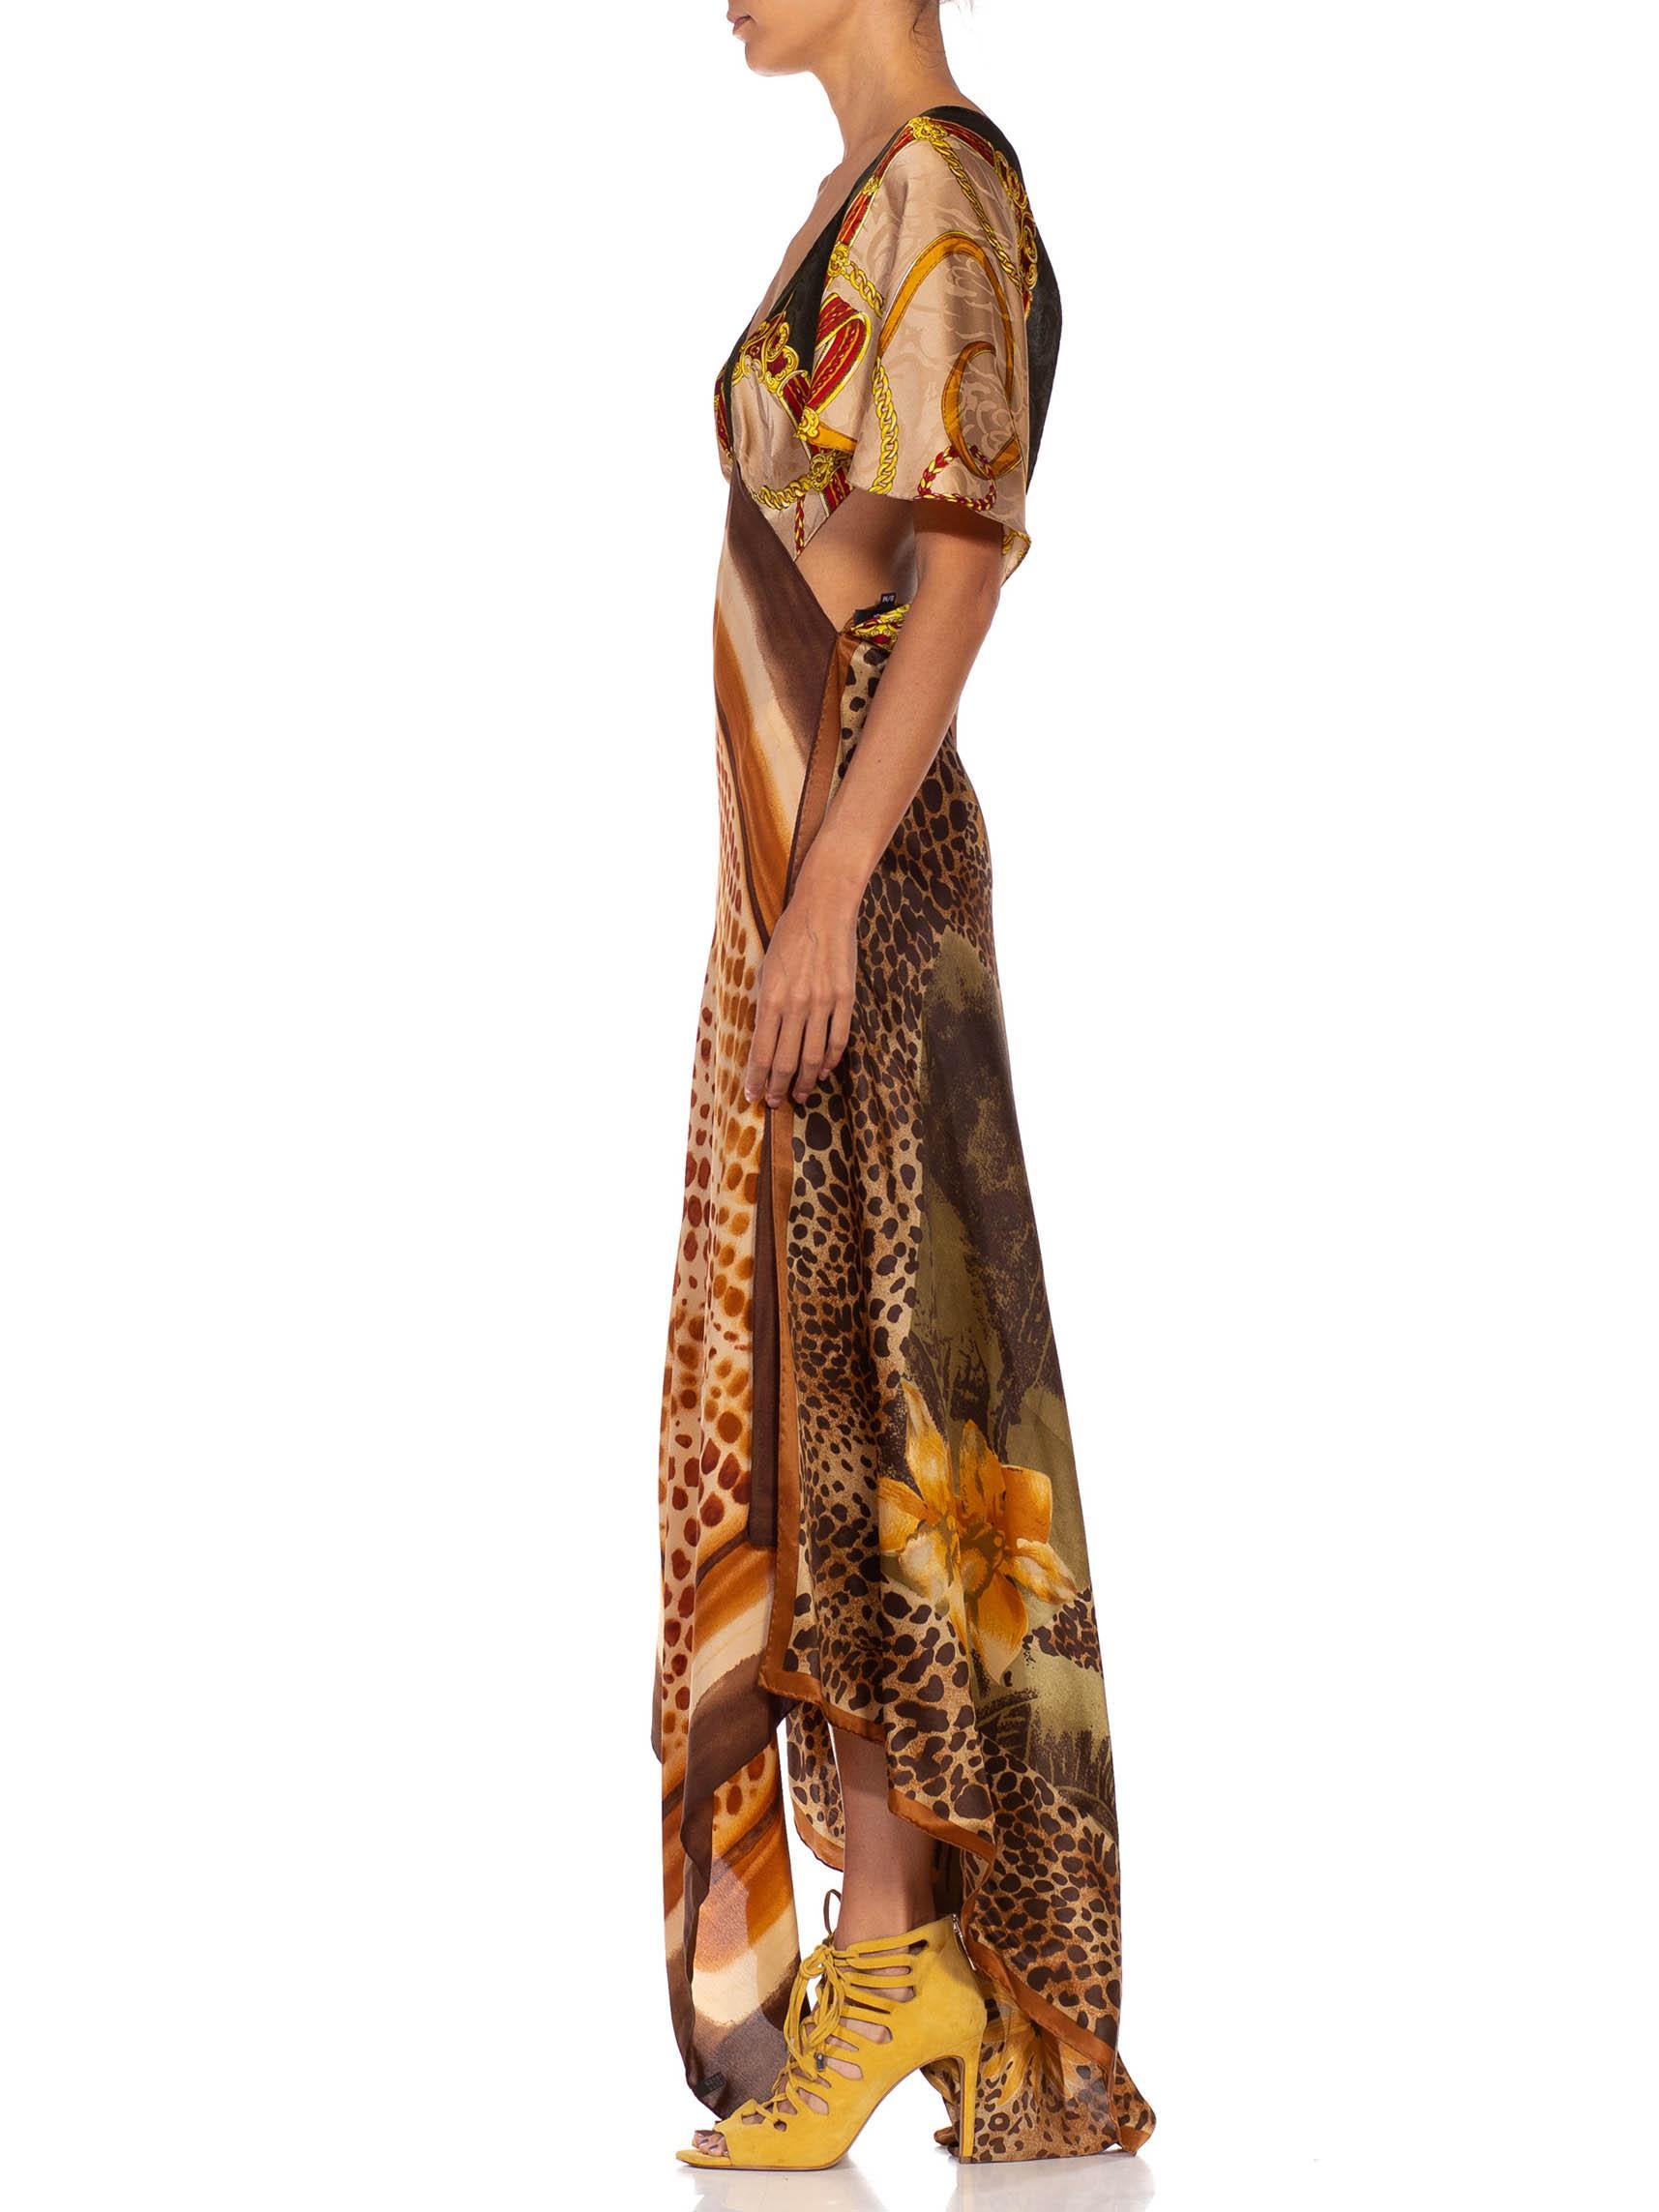 MORPHEW COLLECTION Brown & Black Multi  Silk Twill 3-Scarf Leopard Status Print Dress Made From Vintage Scarves
MORPHEW COLLECTION is made entirely by hand in our NYC Ateliér of rare antique materials sourced from around the globe. Our sustainable